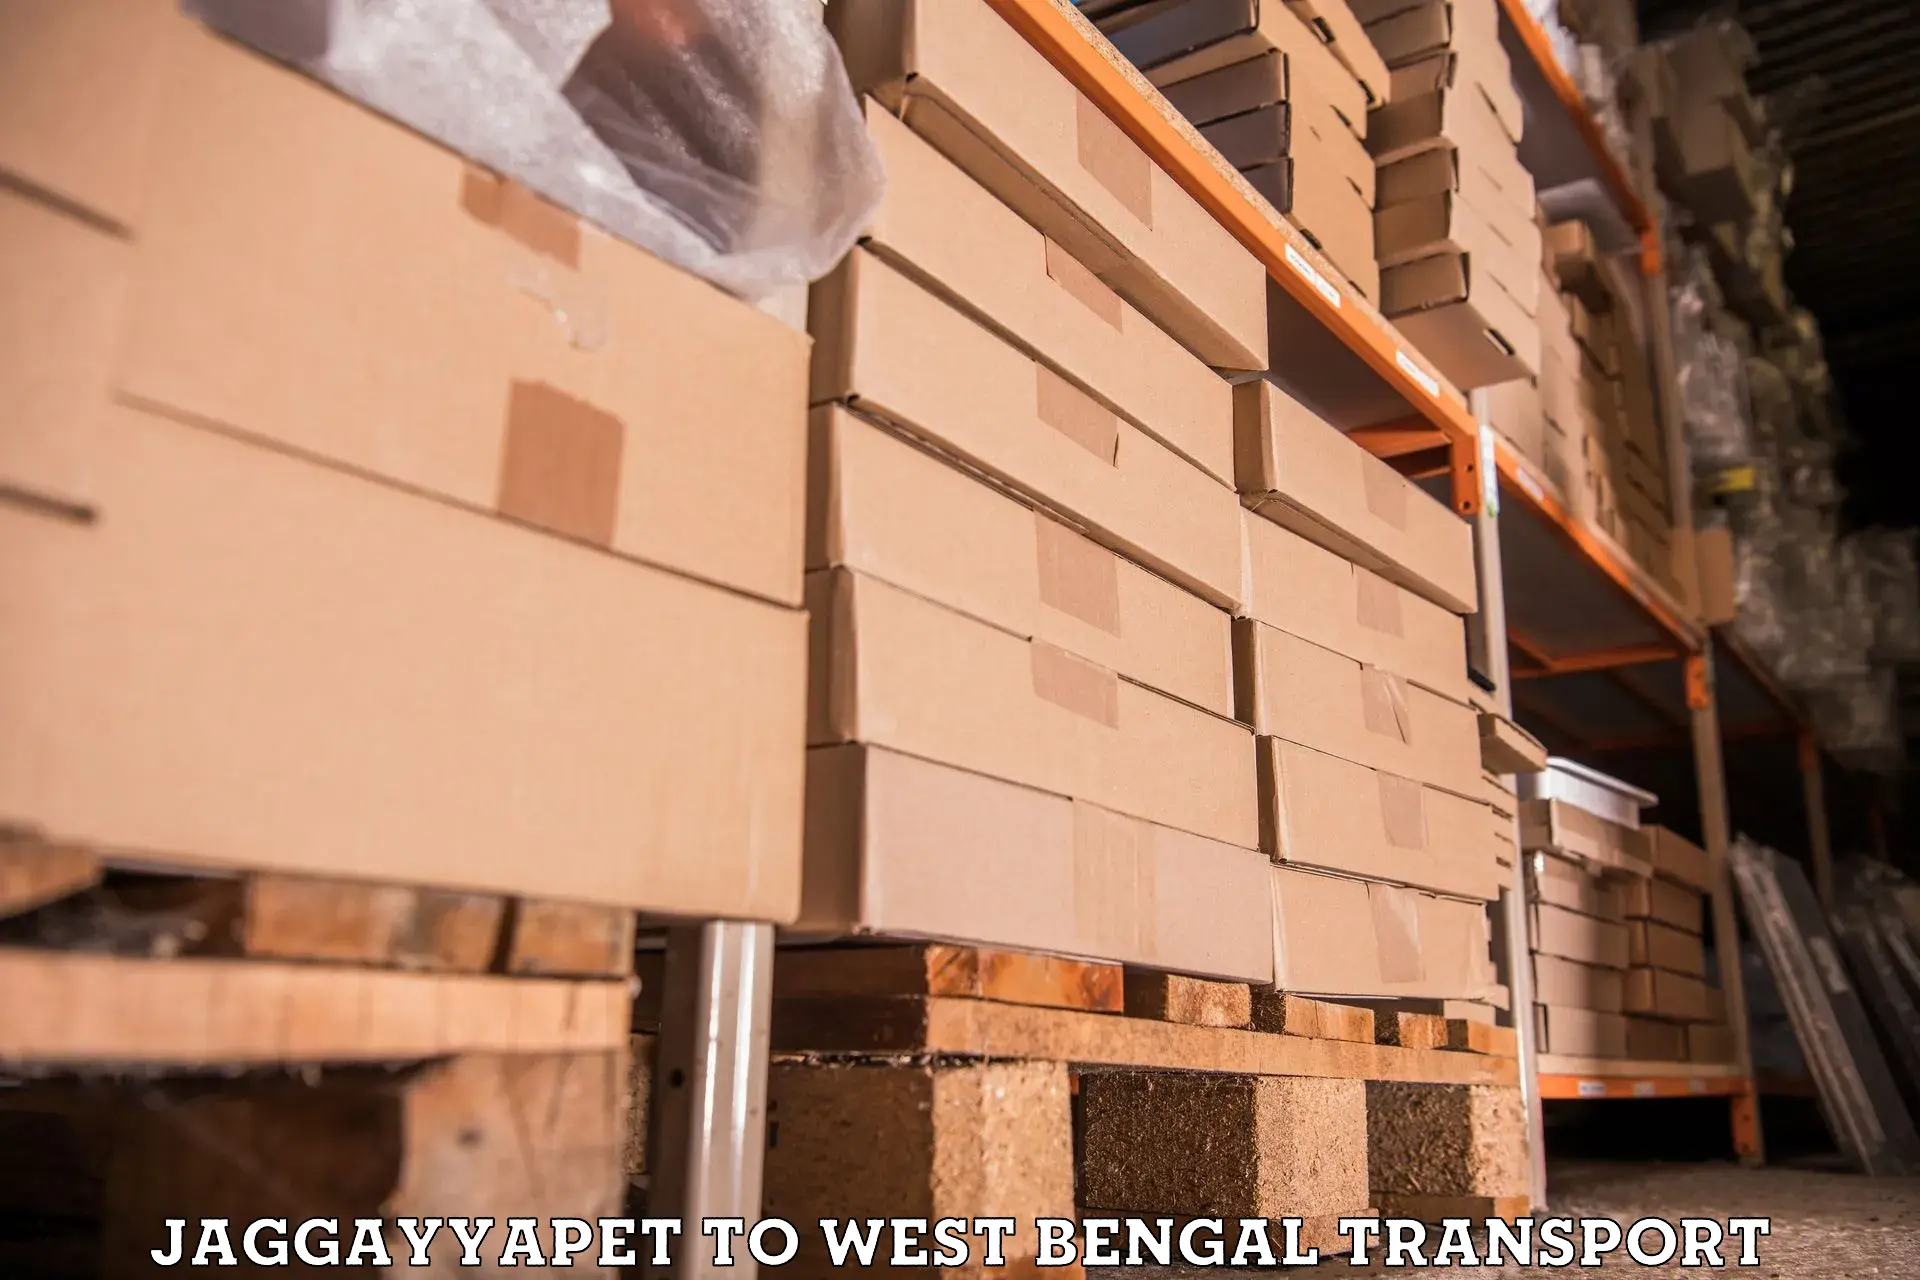 Truck transport companies in India Jaggayyapet to West Bengal